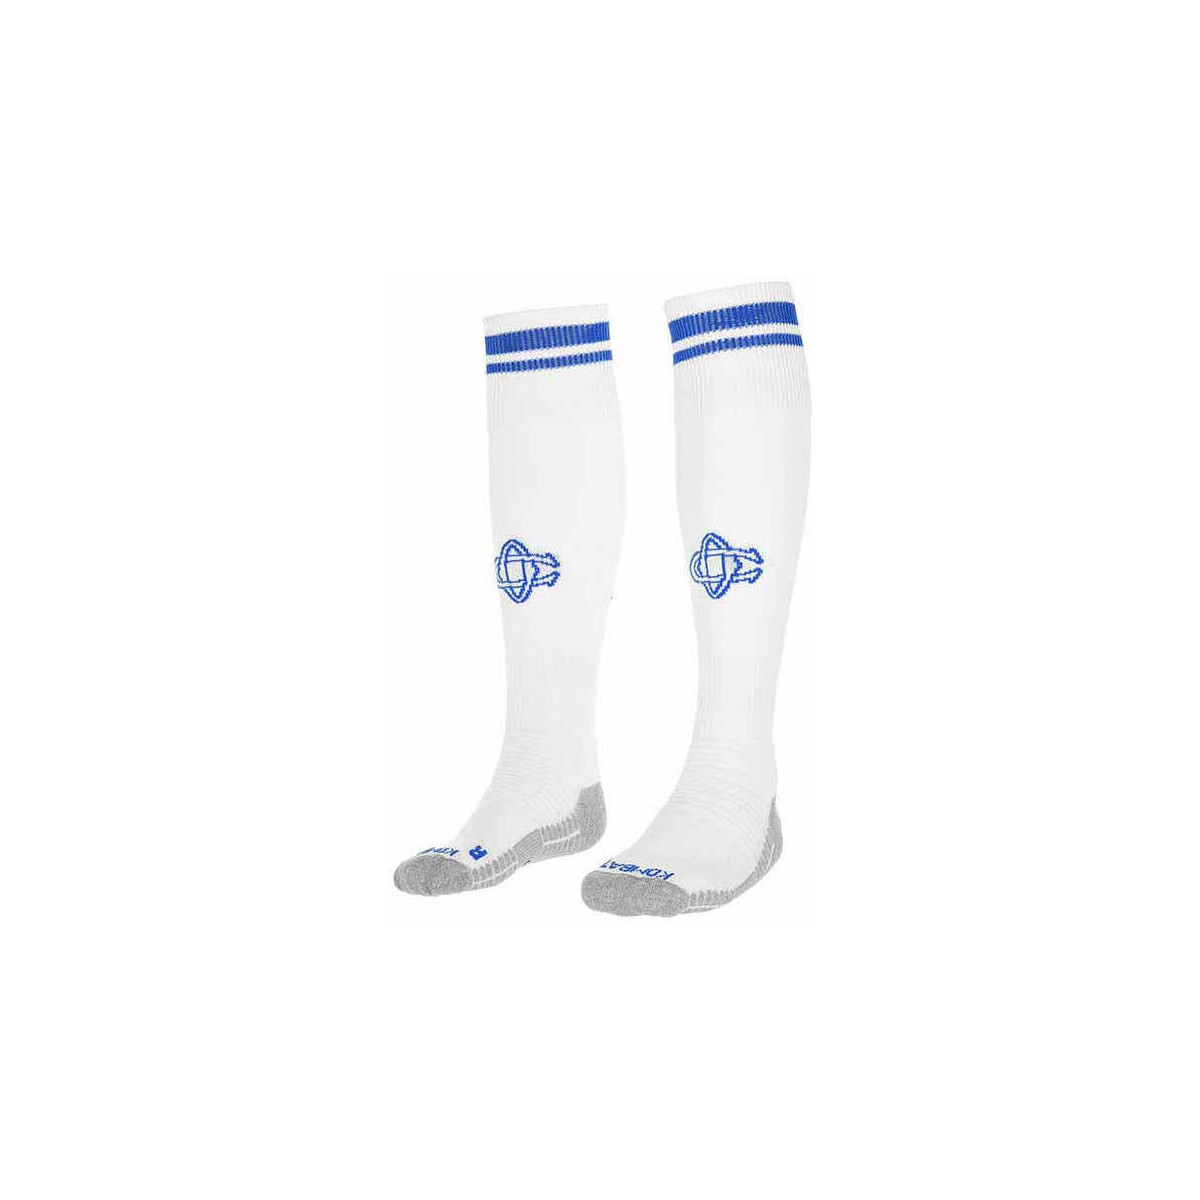 Kappa Blanc Chaussettes de Rugby Kombat Spark Pro Castres Olympique 22/23 2eVIHfXw